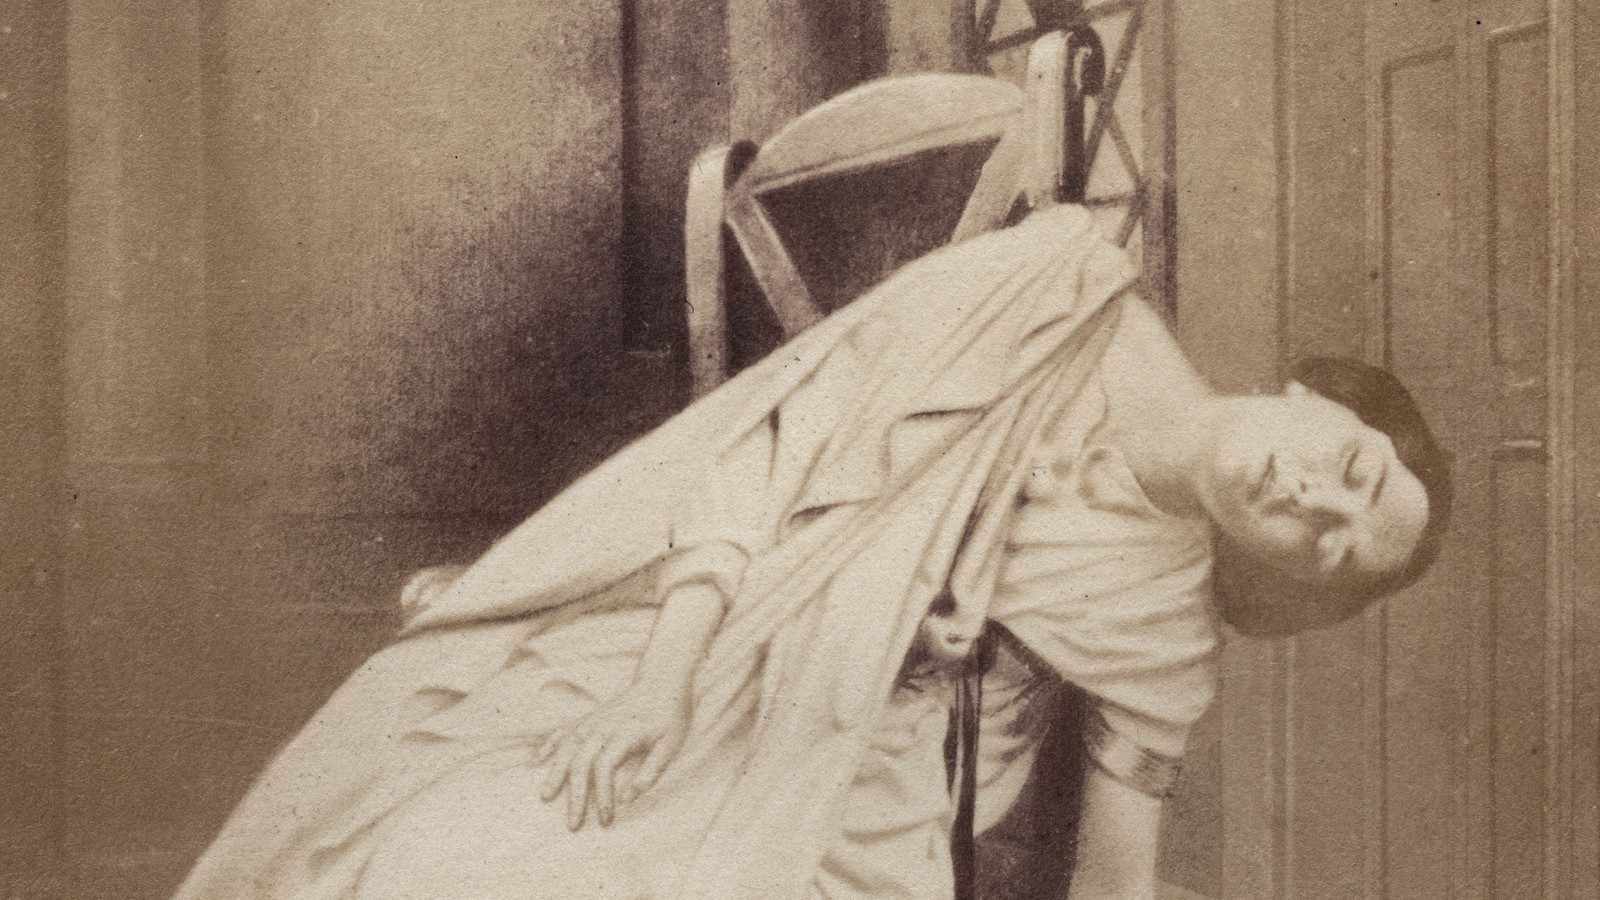 treatment of women in the 19th century